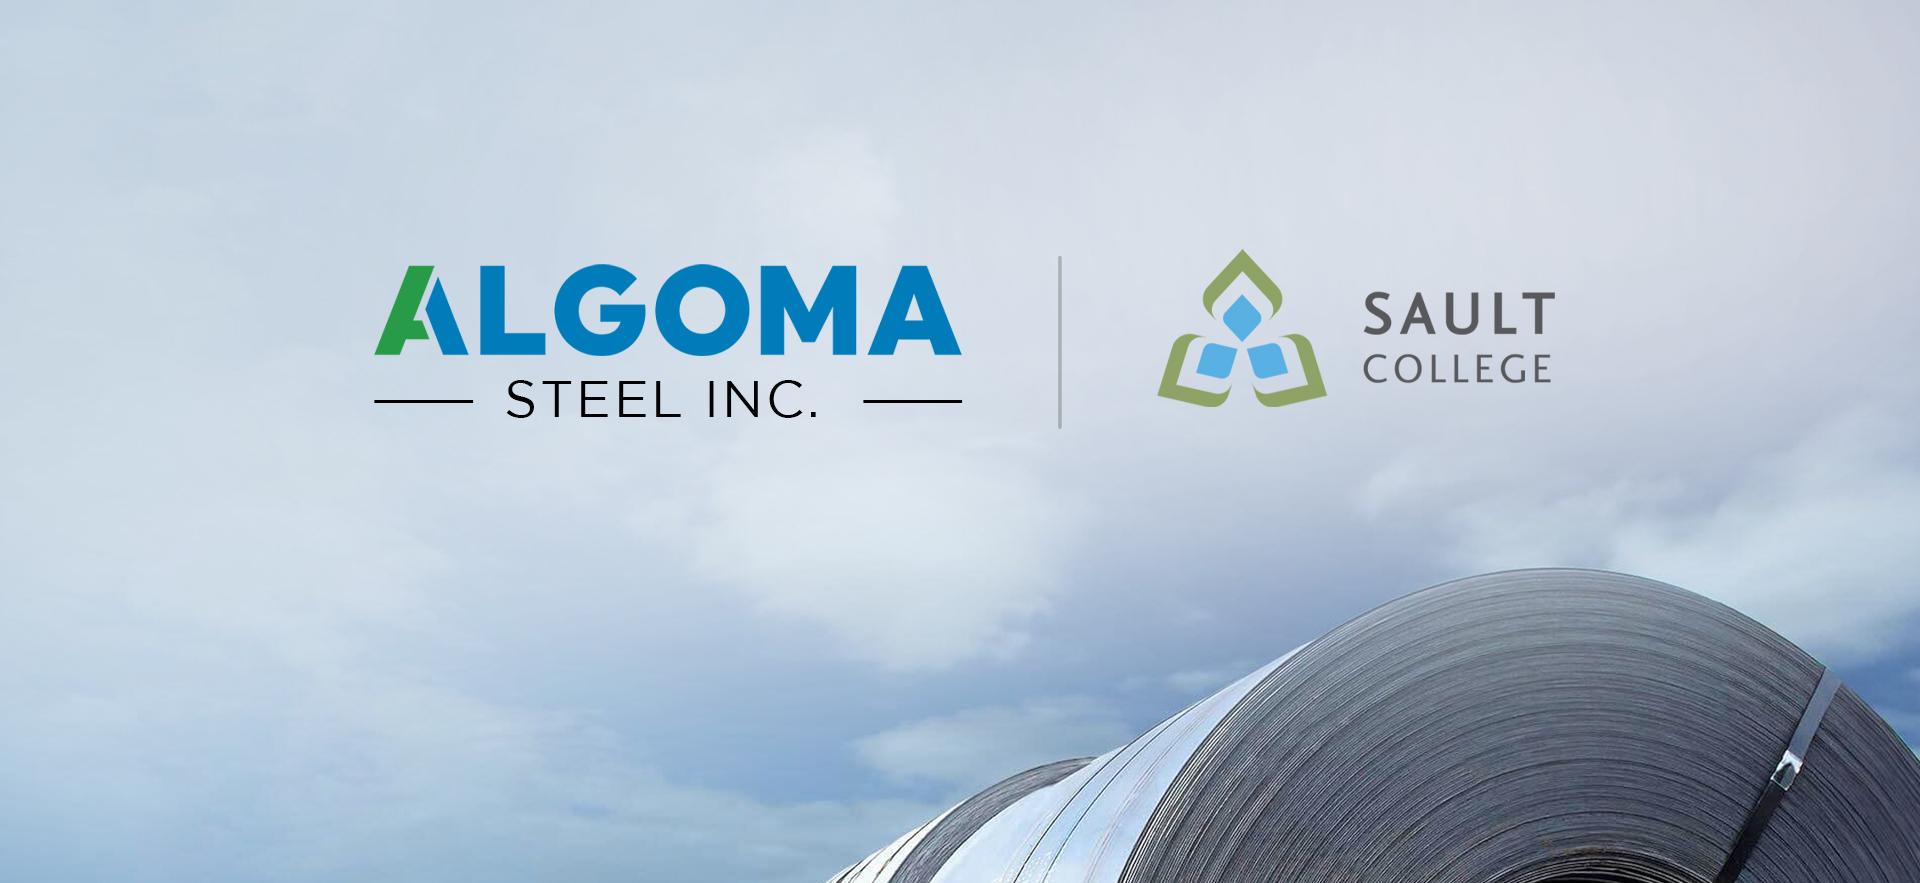 Algoma Steel and Sault College logos on top of background with sky and steel roll